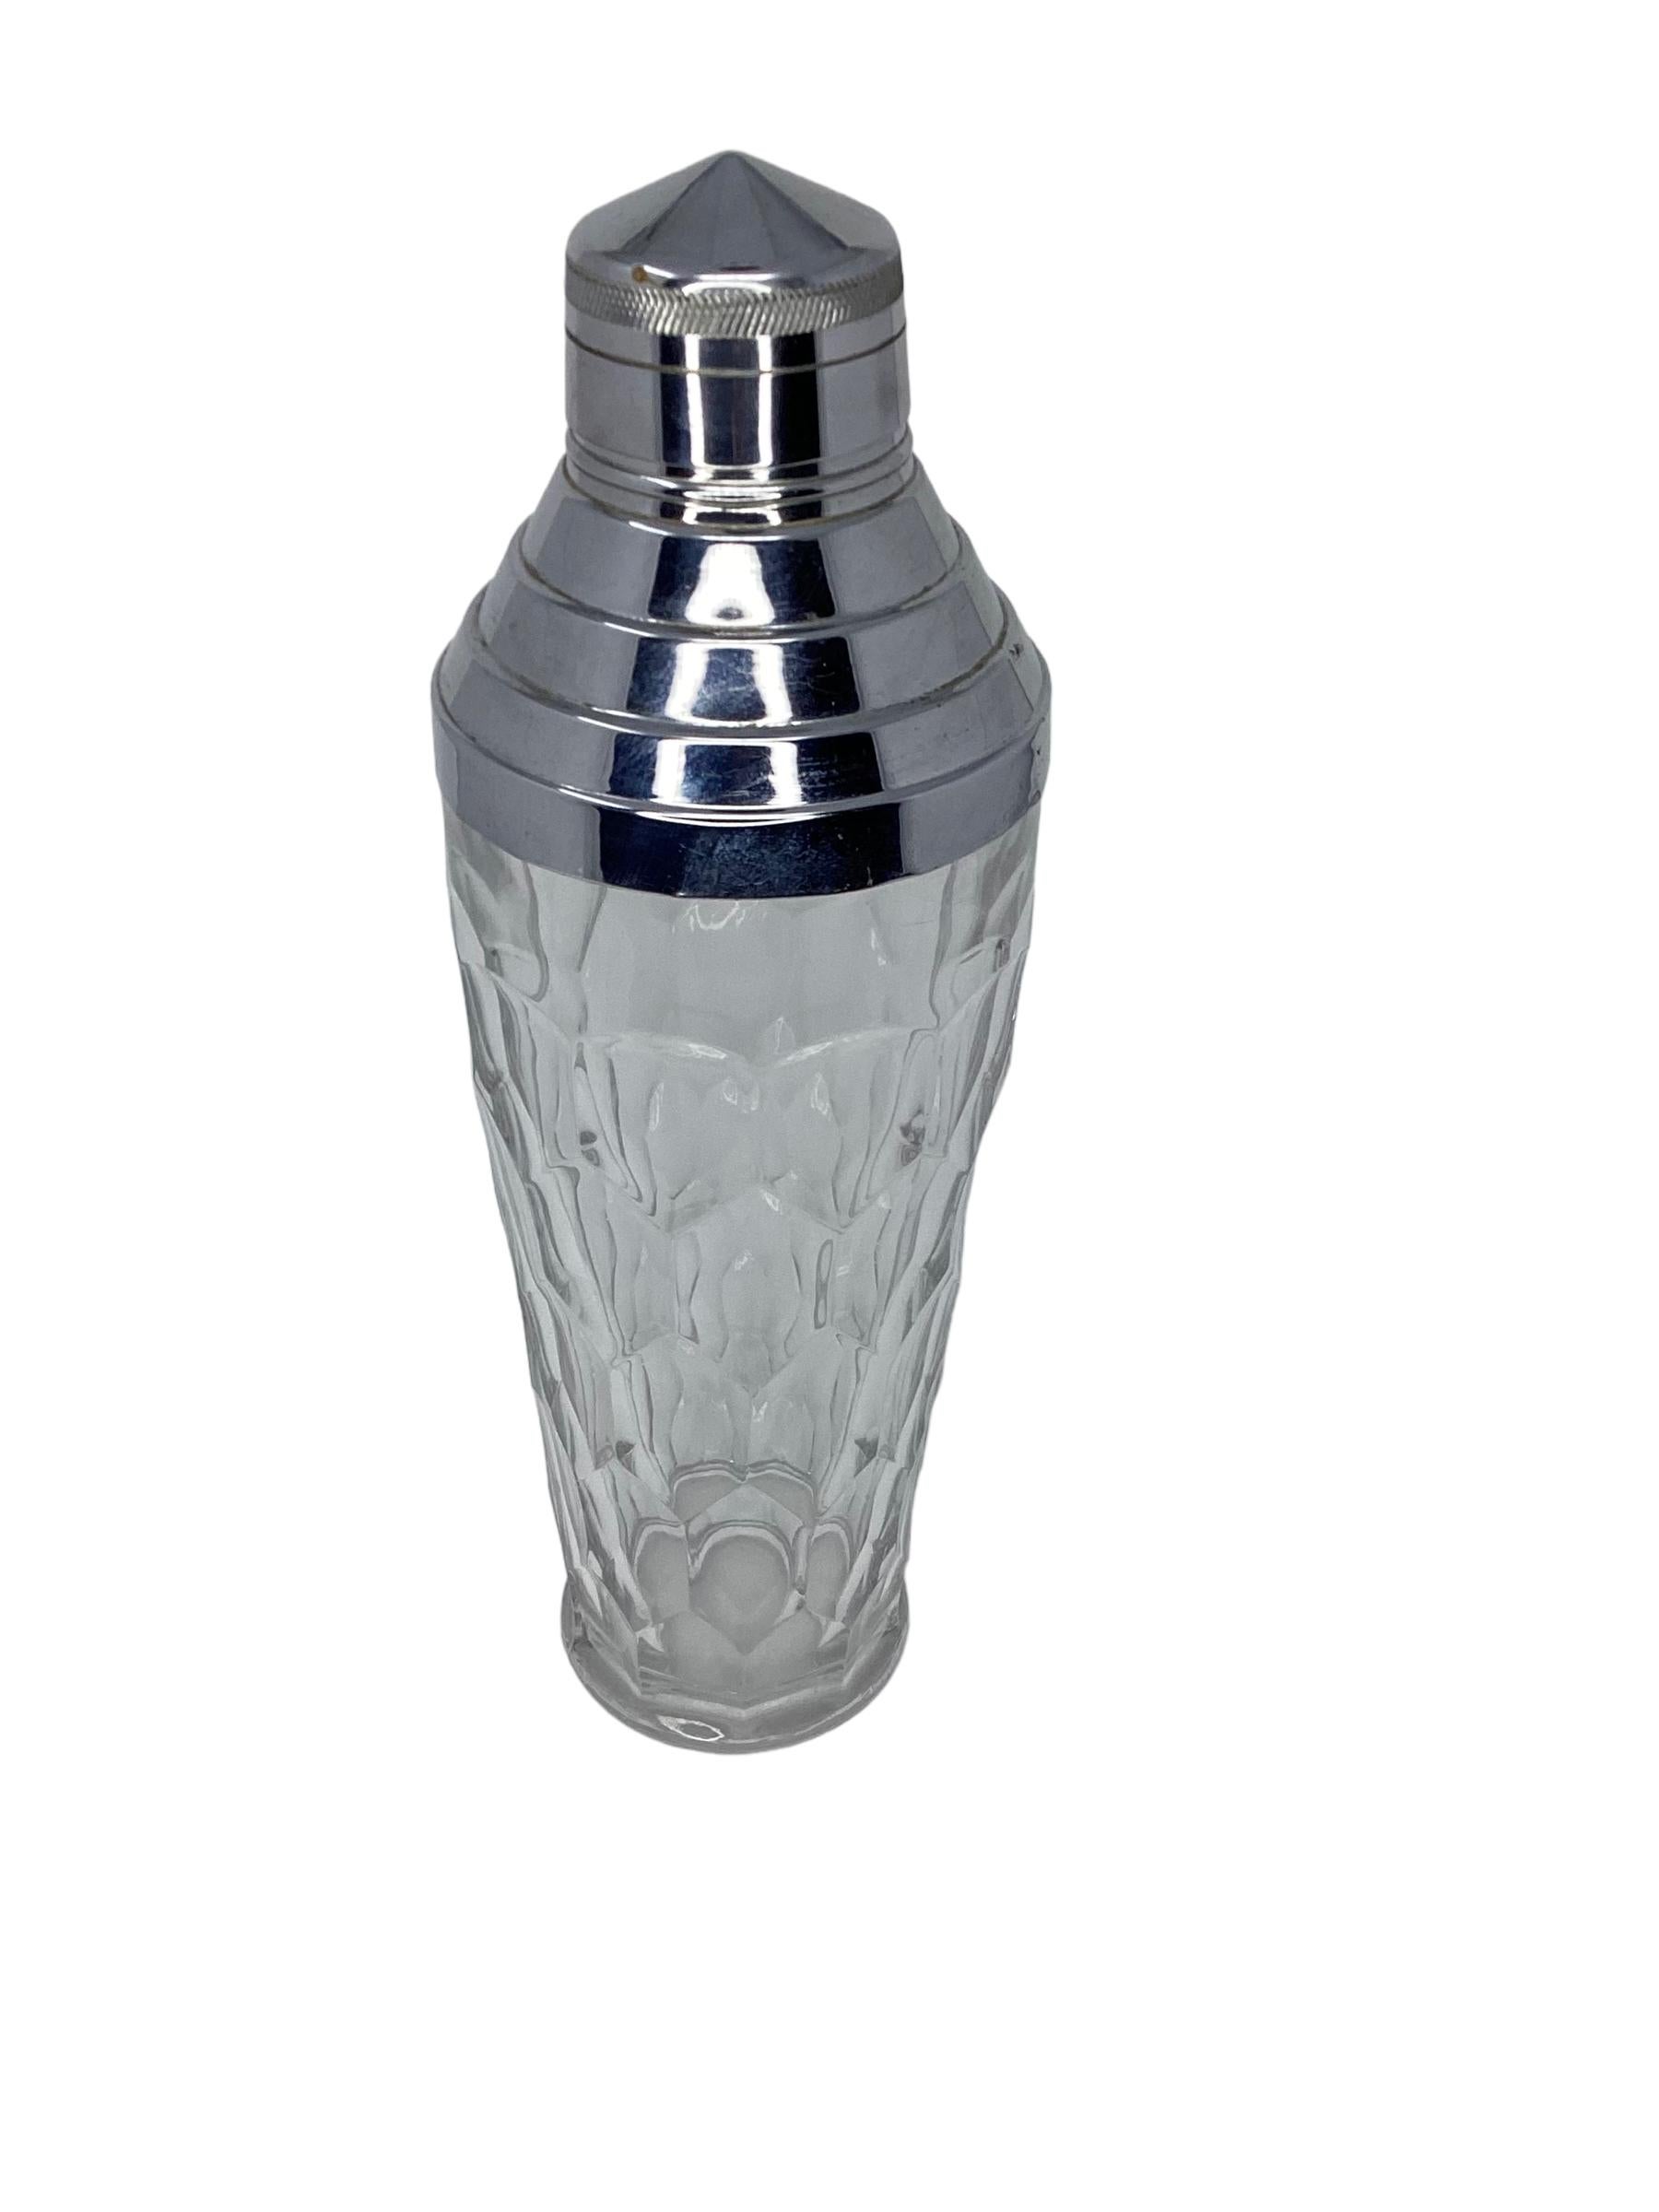 Art Deco molded cocktail shaker in clear glass with diamond pattern. The domed stepped lid features a center pour and is in chrome.